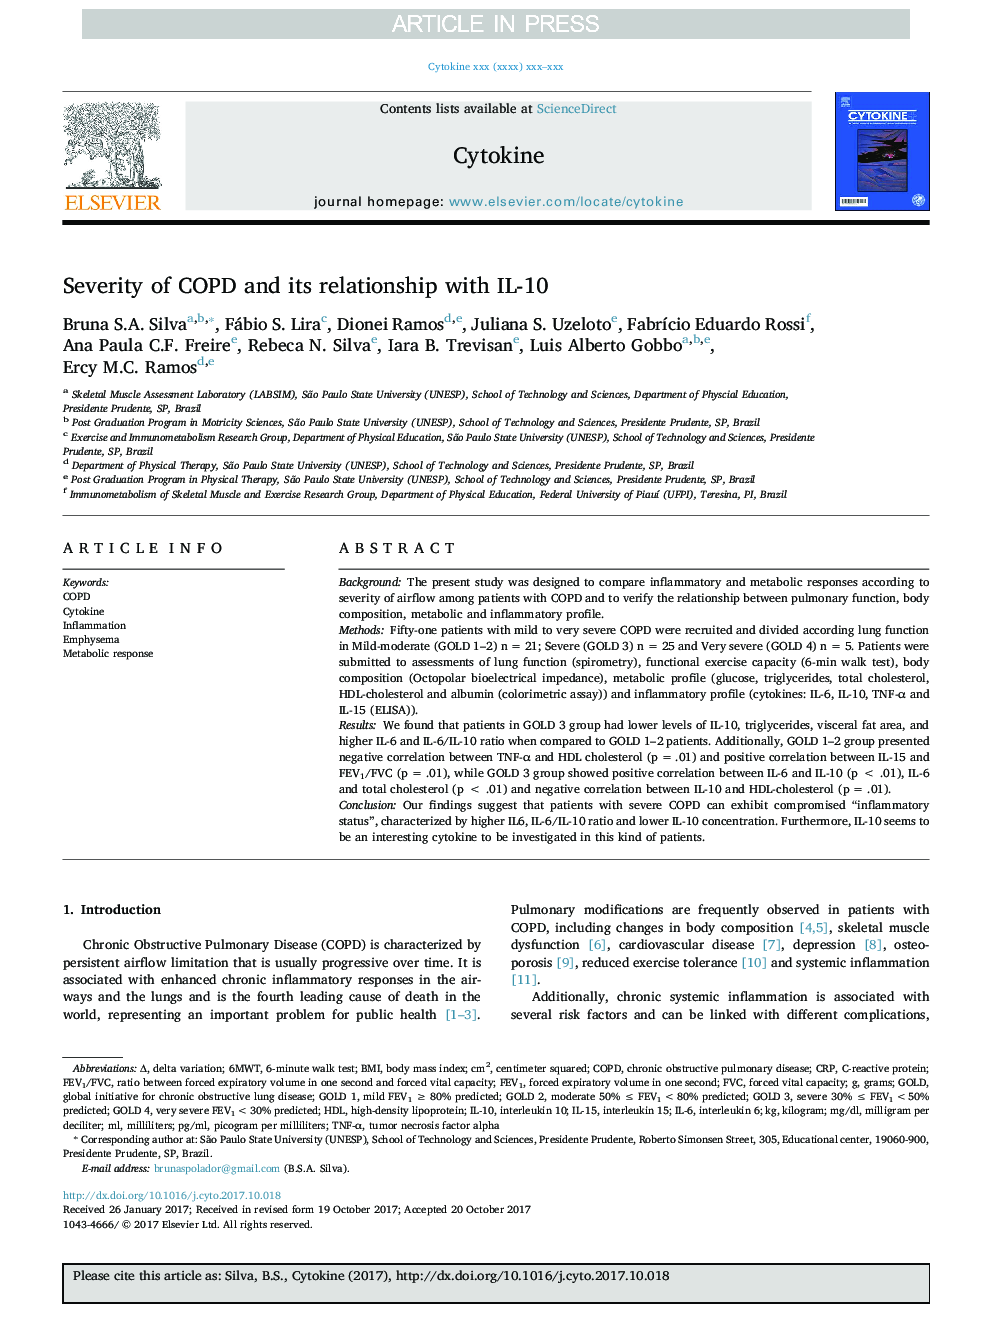 Severity of COPD and its relationship with IL-10